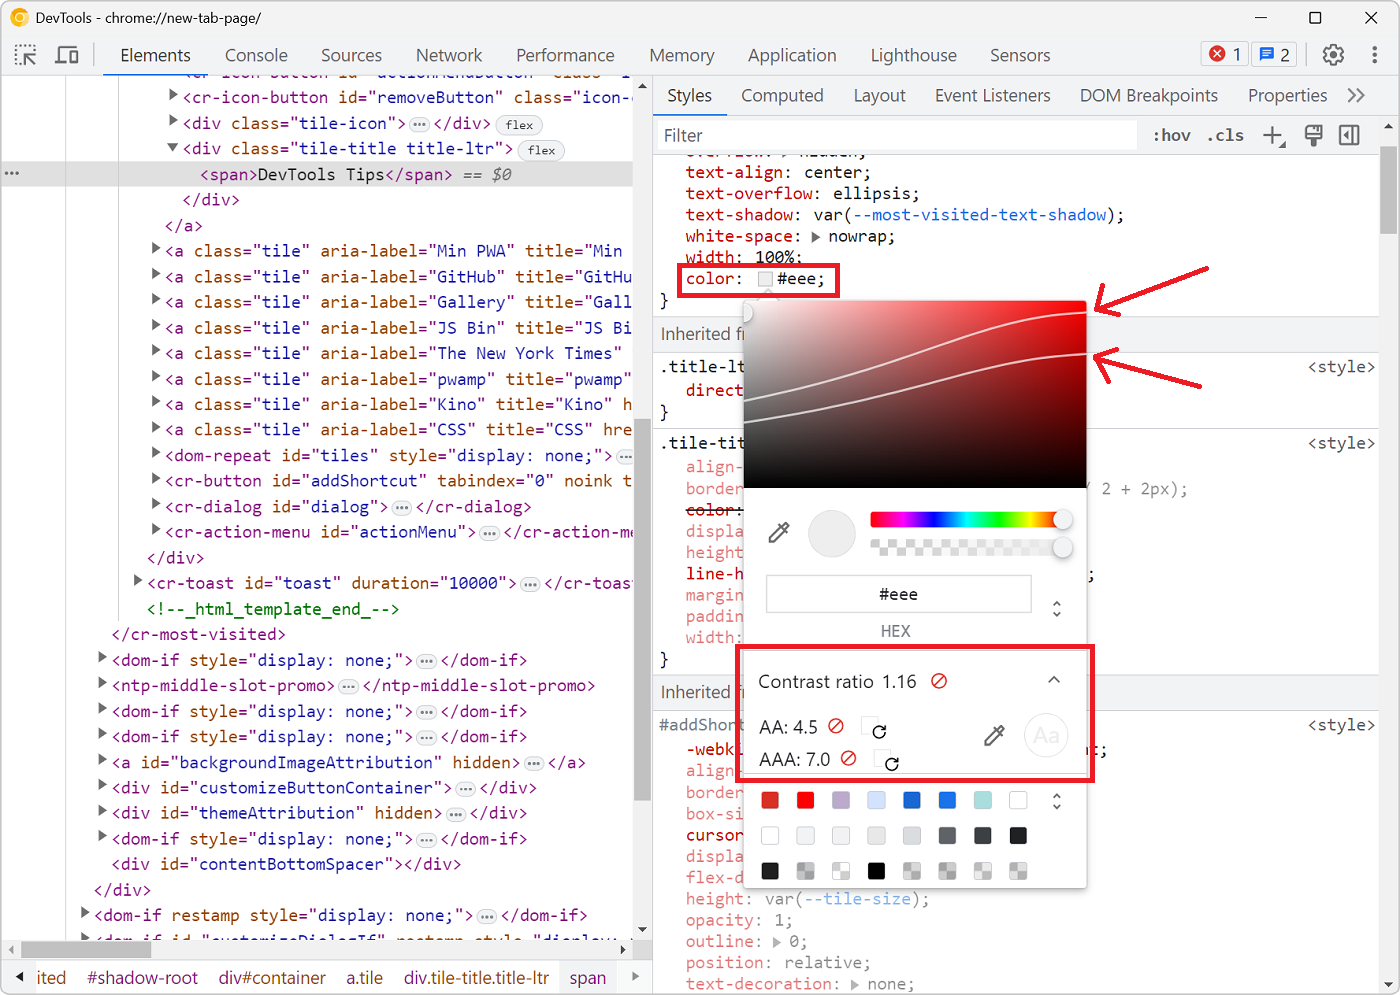 The chrome color picker, showing the contrast lines and new color suggestions